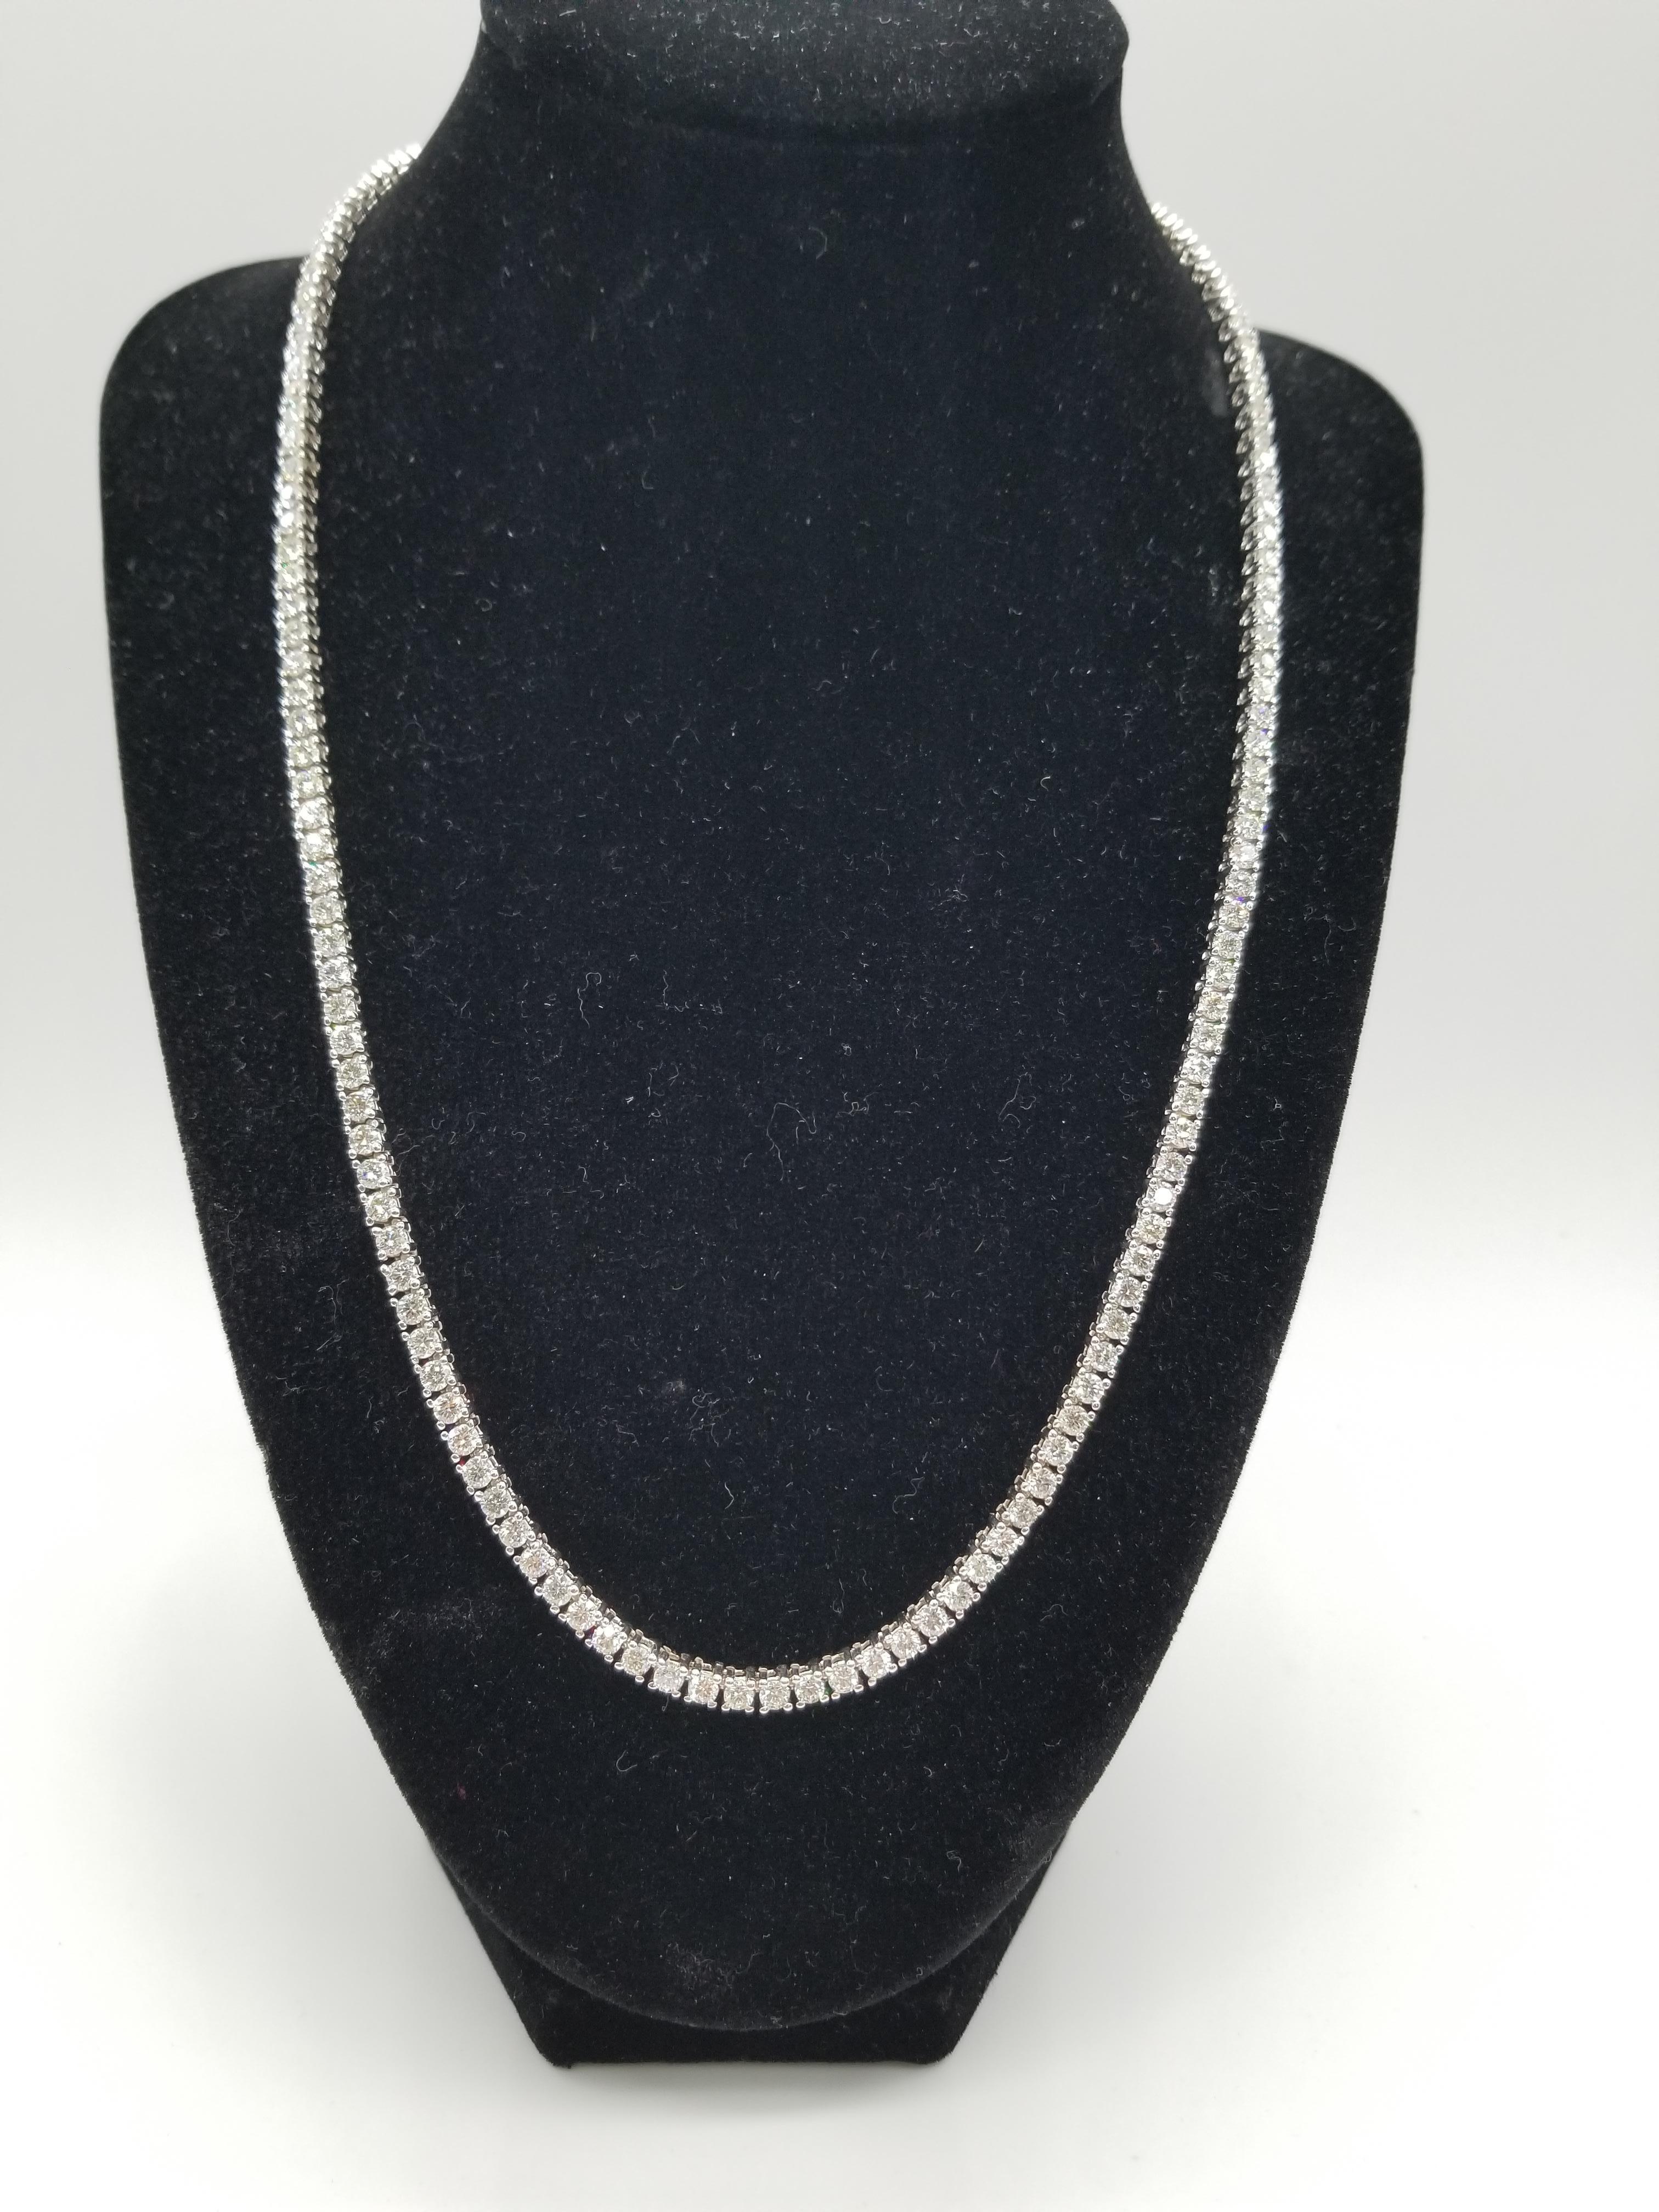 Elegantly simple. Beautiful jewelry 14 Karat White Gold Round Brilliant Cut Diamond Tennis Necklace set on 4 prong setting. The total diamond weight is 14.60carats. The closure is an insert clasp with safety clasp. Length is 20 inches. Average I